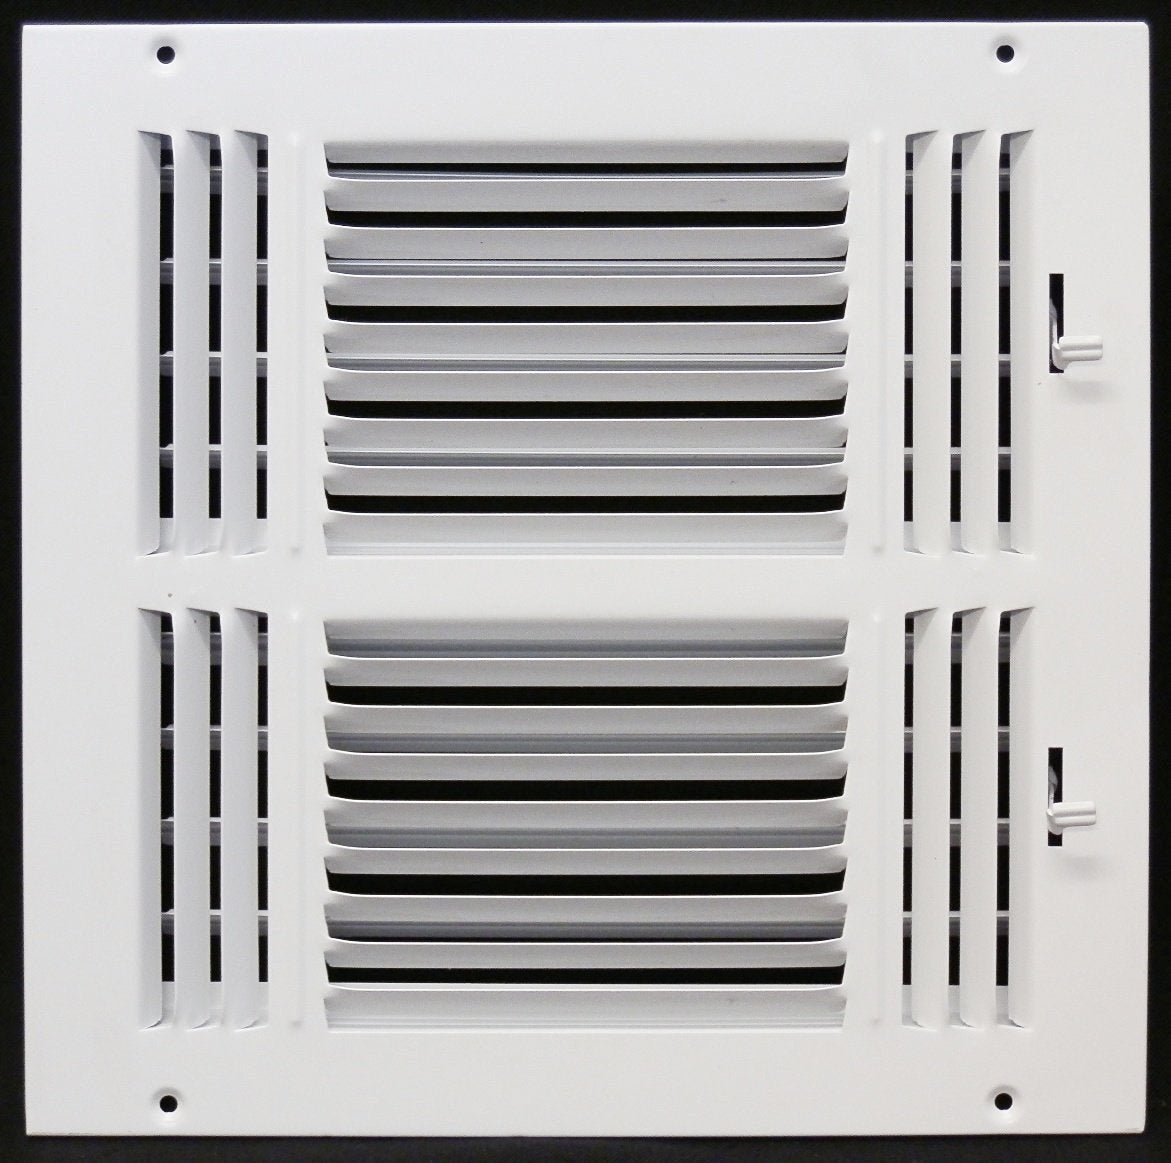 14&quot; X 14&quot; 3-Way AIR SUPPLY GRILLE - DUCT COVER &amp; DIFFUSER - Flat Stamped Face